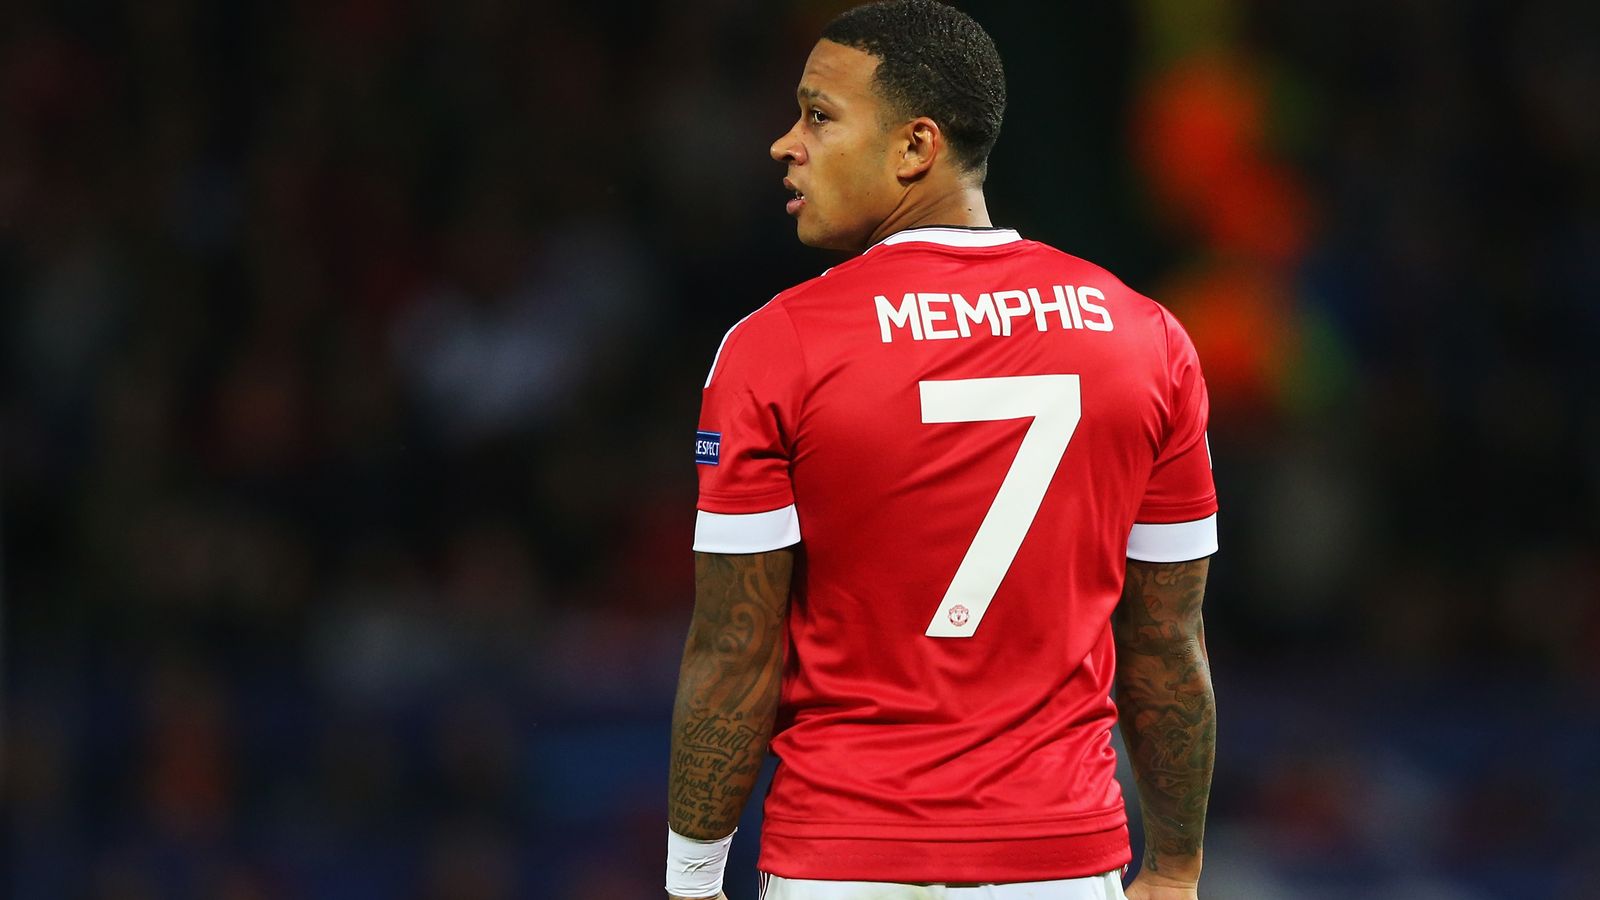 Manchester United are interested in re-signing Memphis Depay from FC Barcelona.